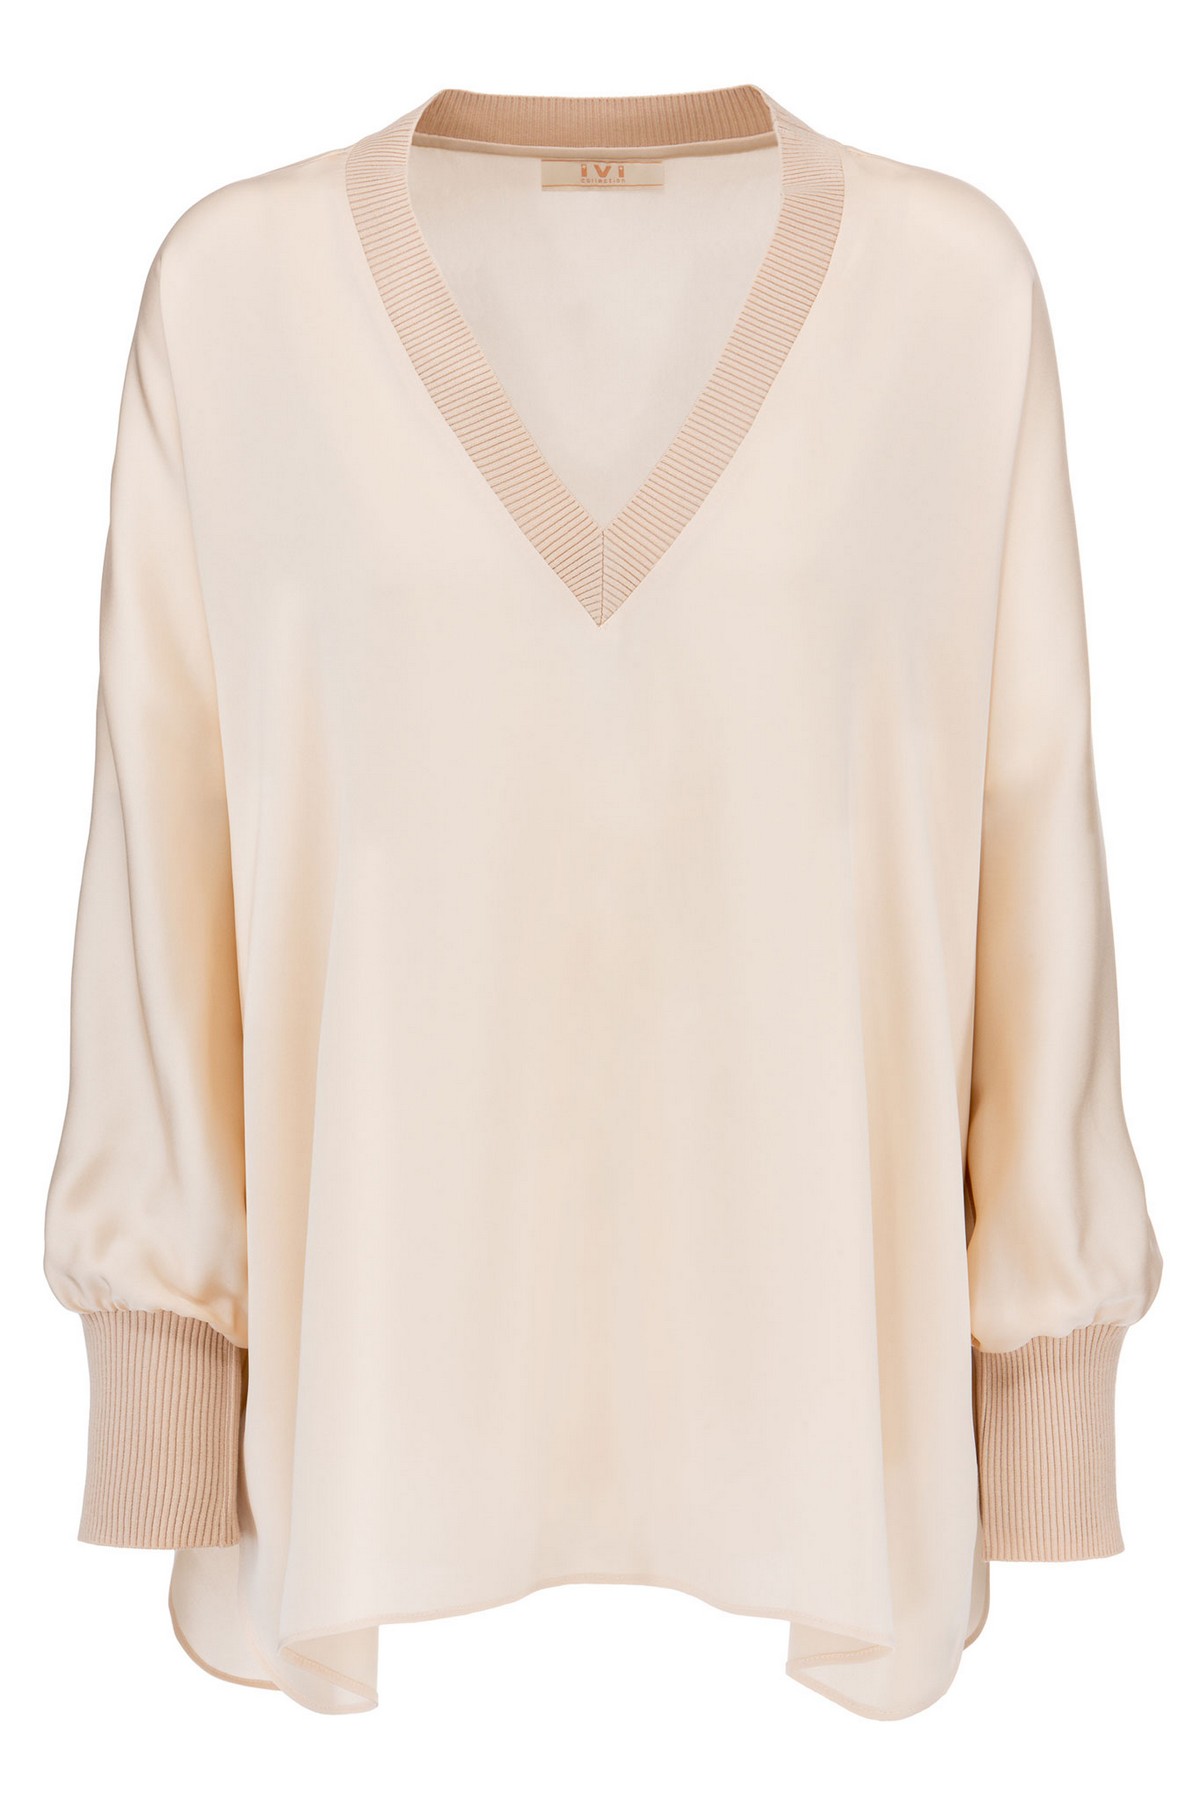 Ivi Collection - Solid Silk tunic - Bloes V zijde effen light sand